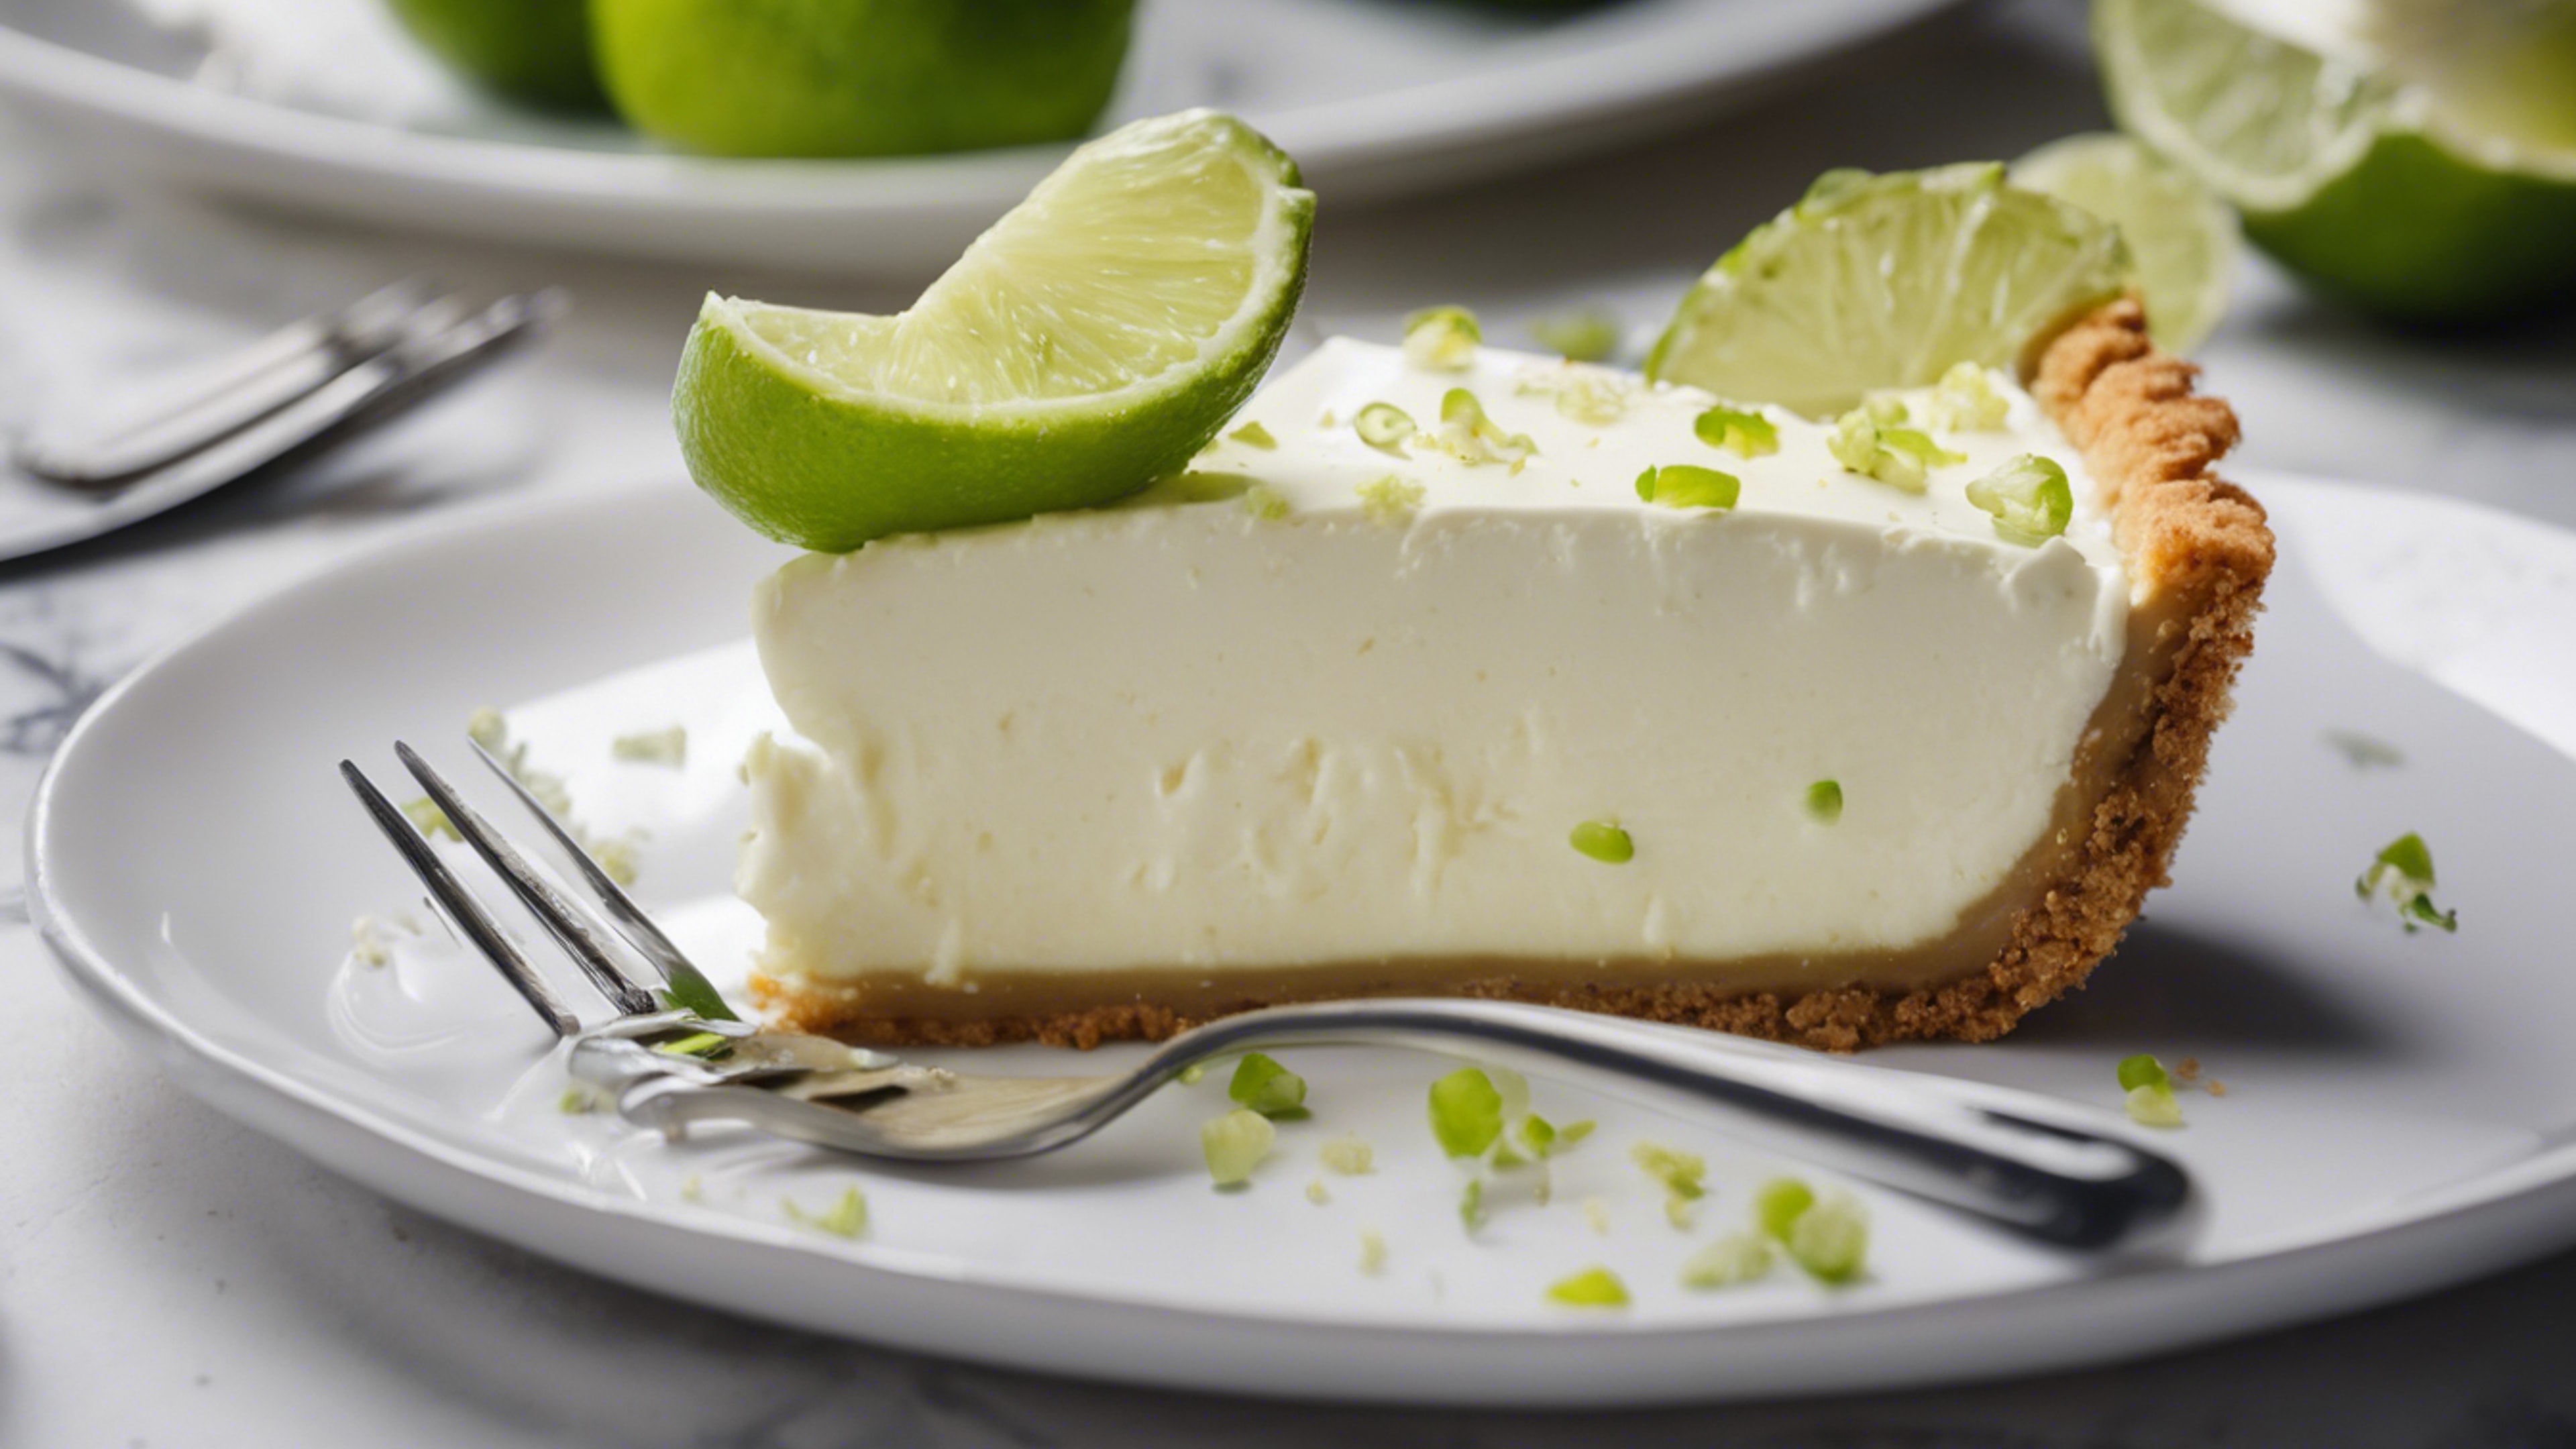 Delicious key lime pie served on a white ceramic plate with a silver fork. Papel de parede[dc9d1e1923f243919b66]